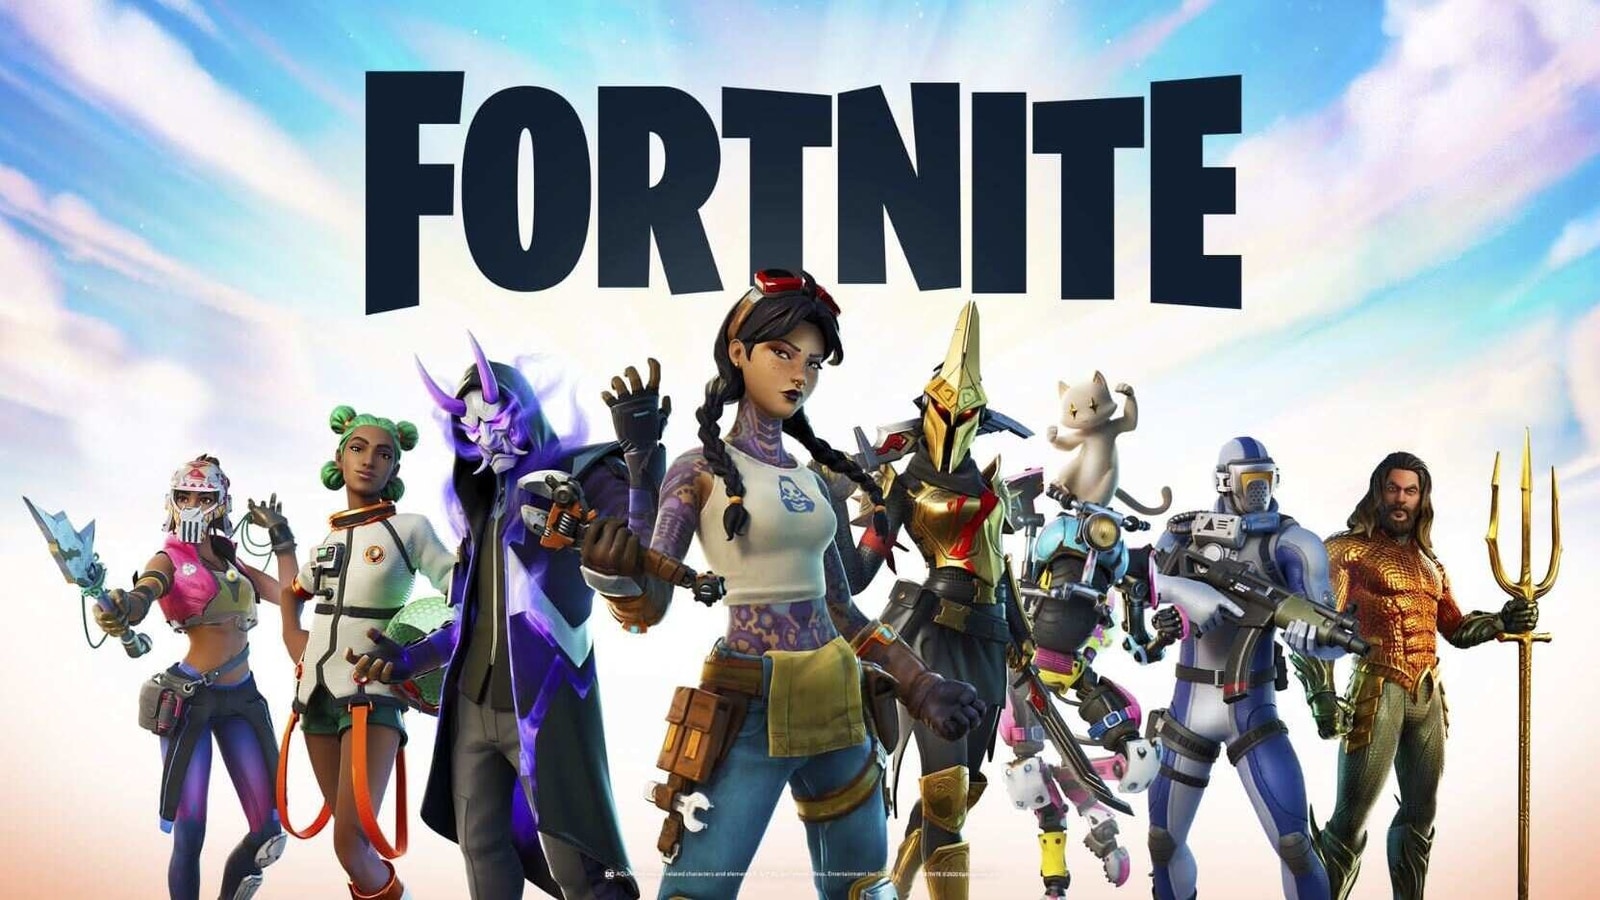 Fortnite To Mark Its Return To Apple Devices via. Nvidia Cloud Gaming  Services - Fan Engagement and Gaming Experience Platform